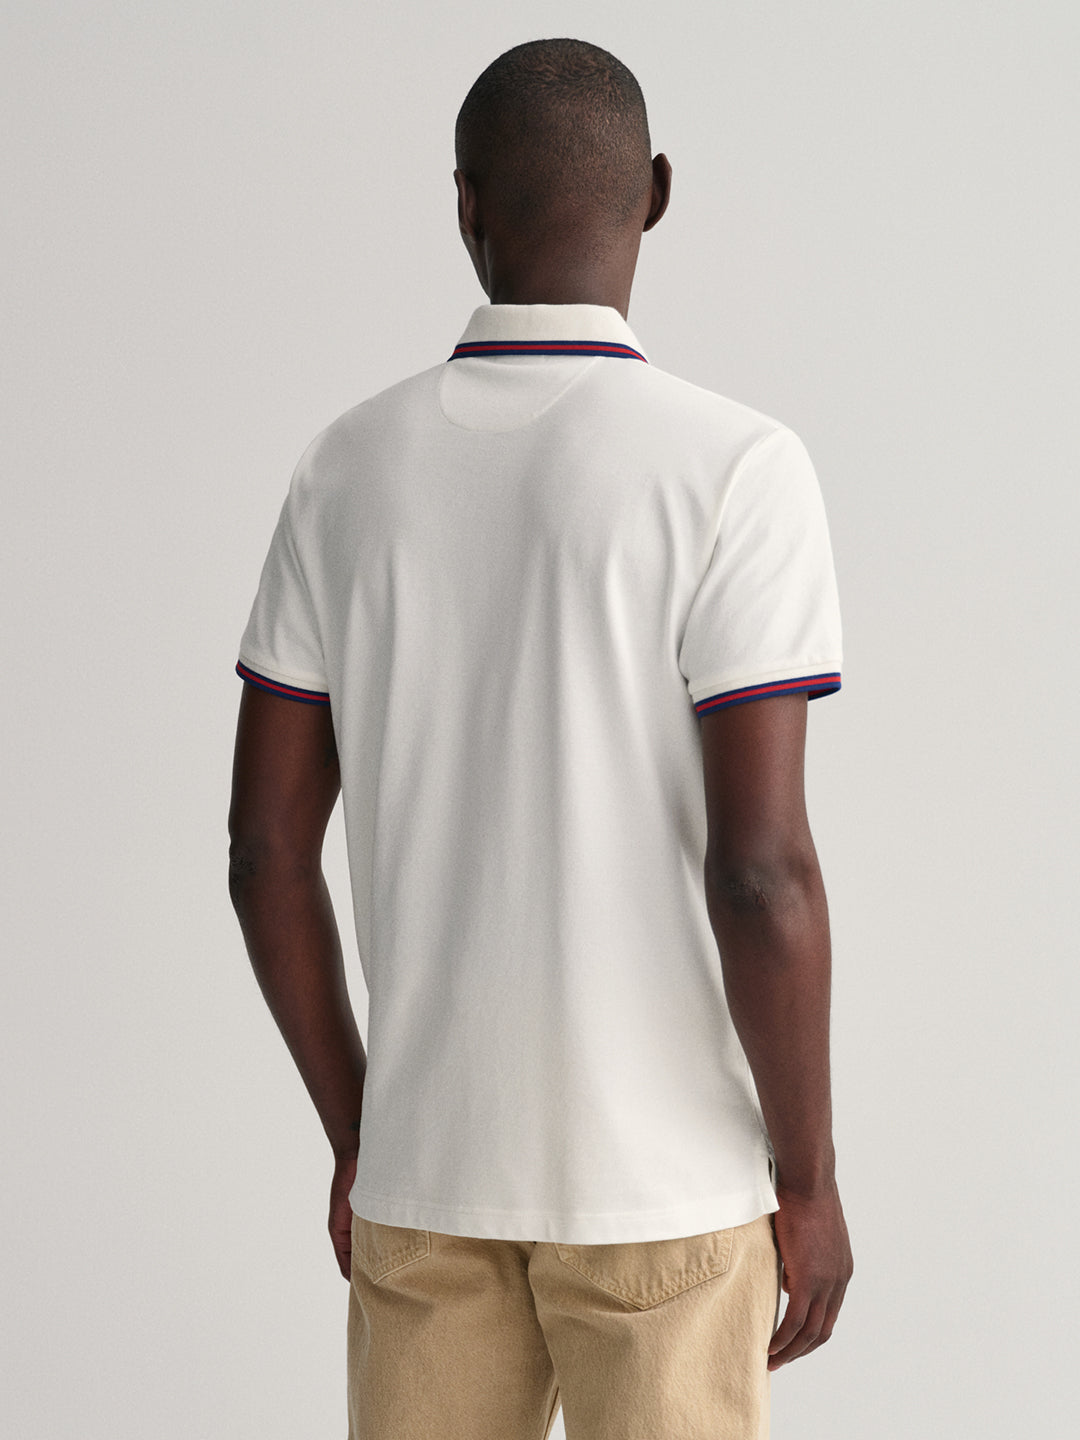 Gant White 3Color Tipping Regular Fit Pique Polo T-Shirt